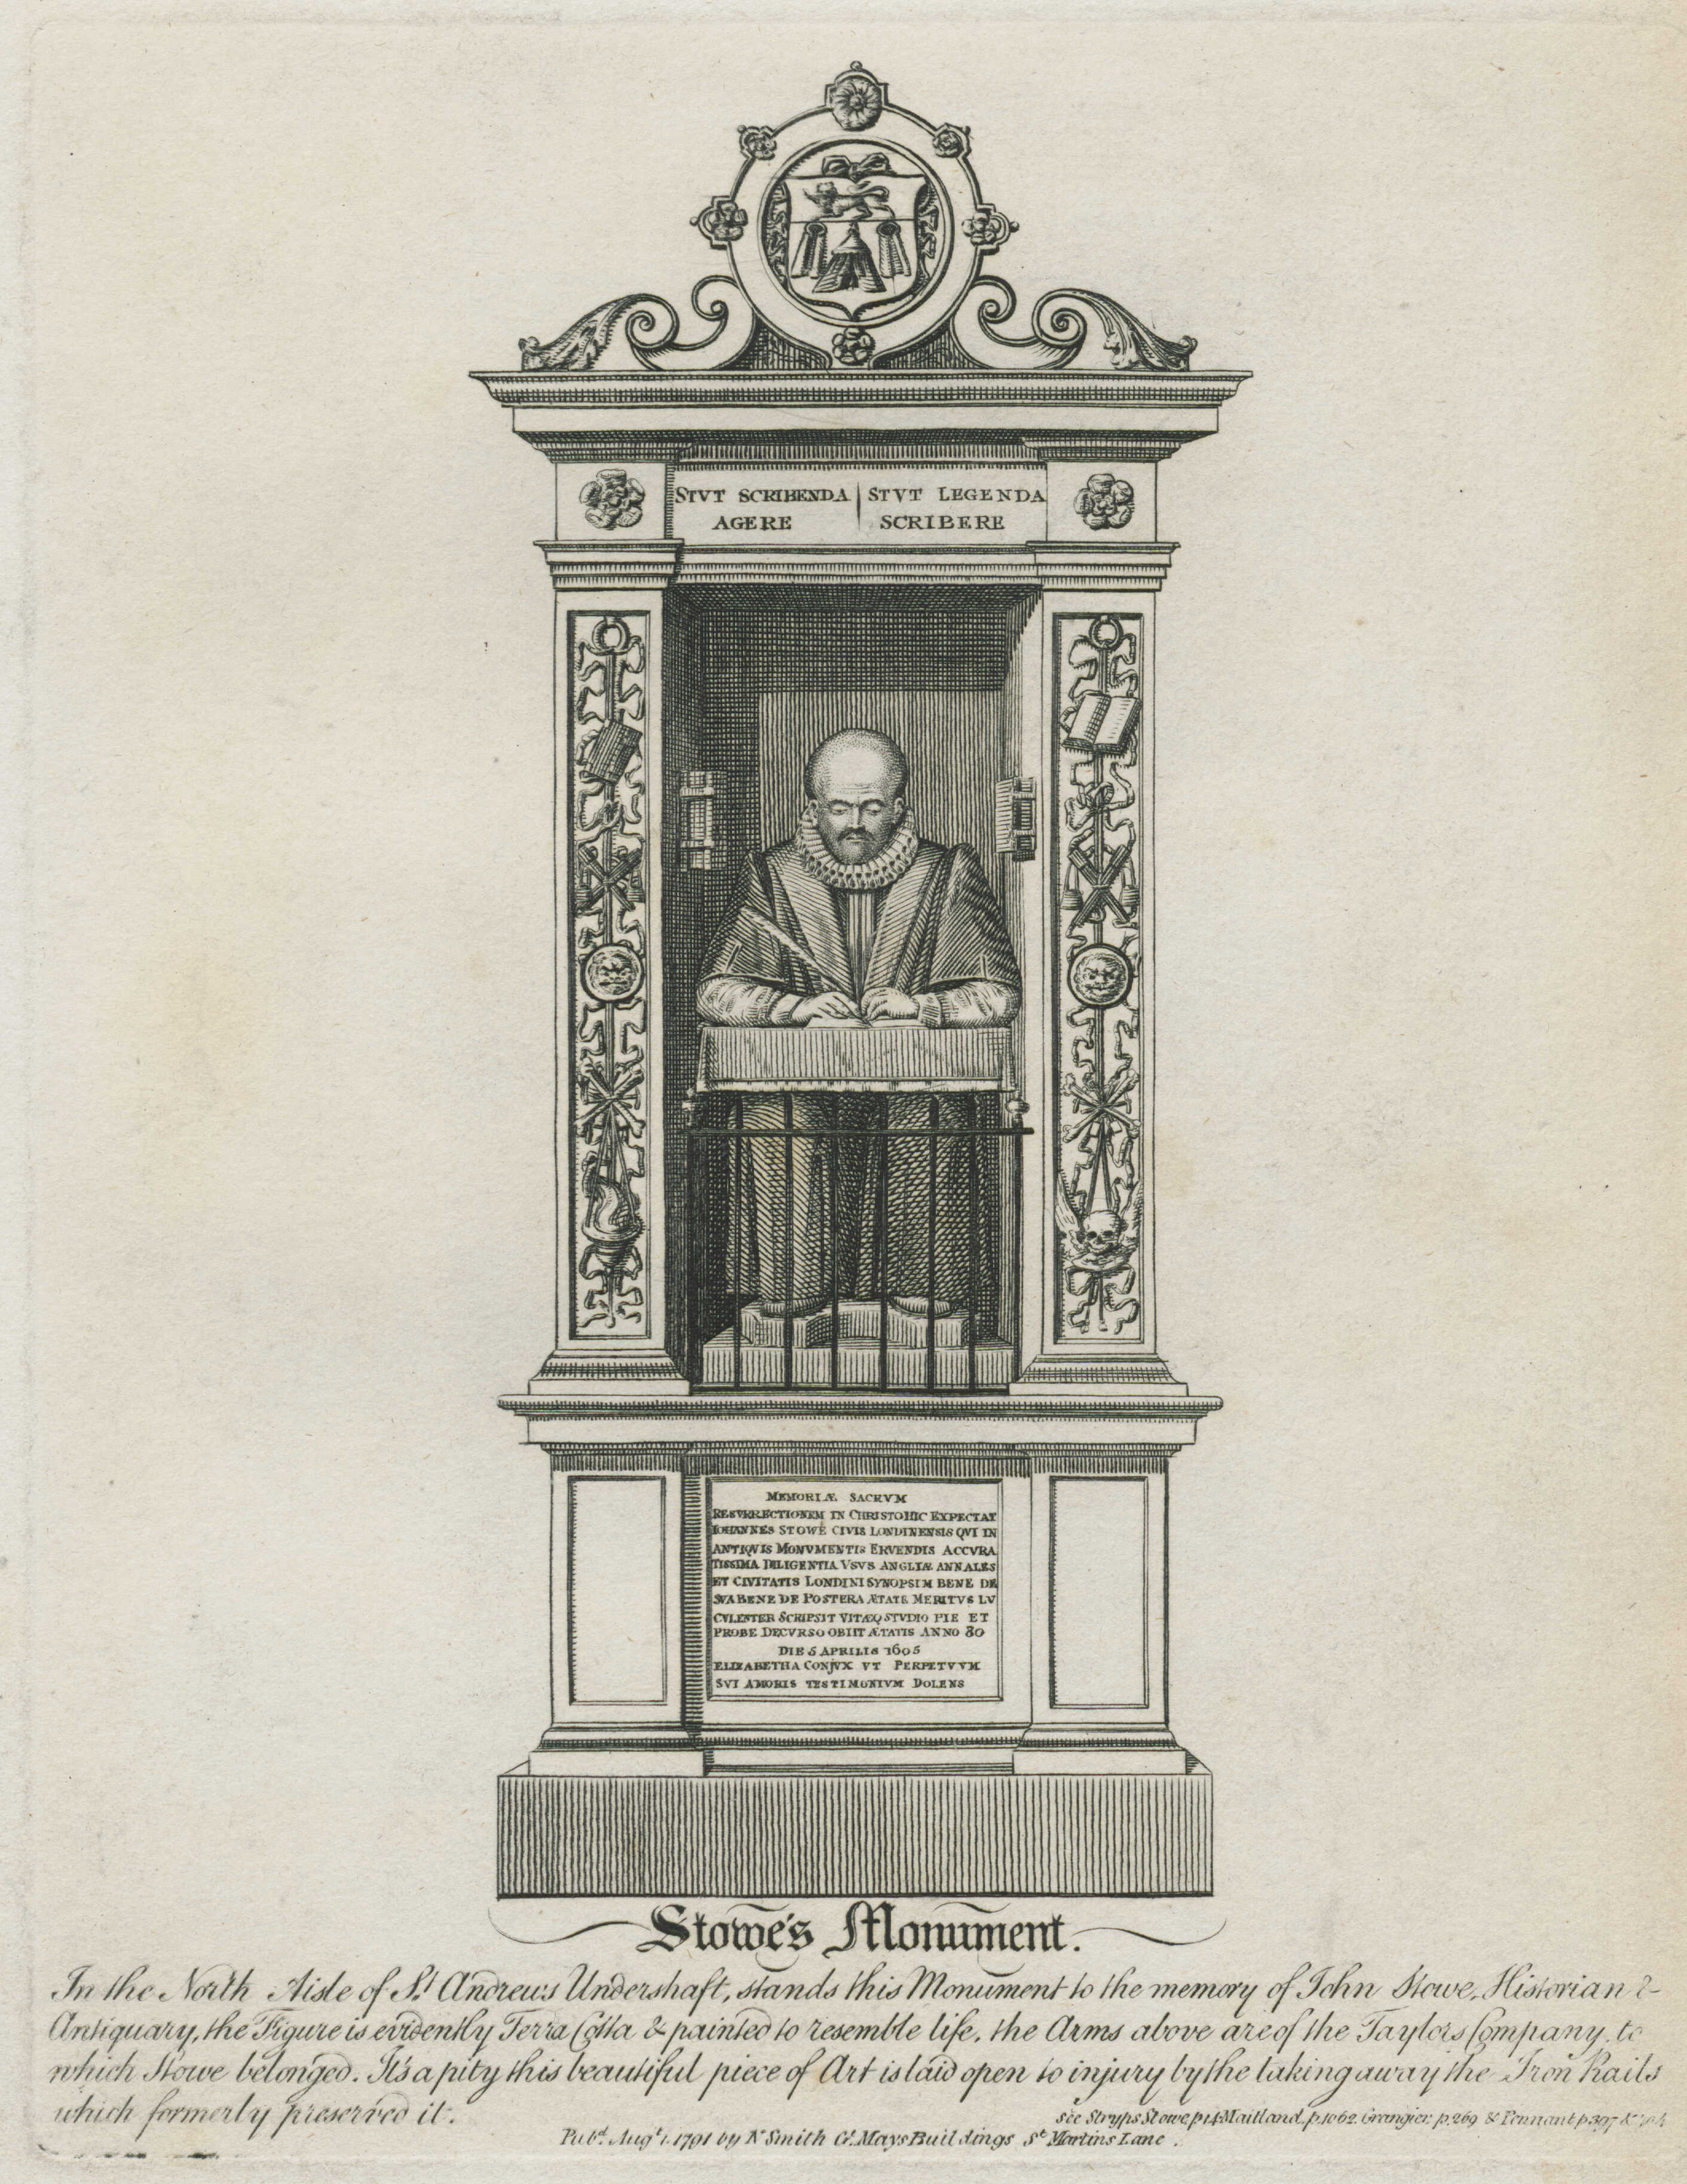 23-stowes-monument-in-the-north-aisle-of-st-andrews-undershaft